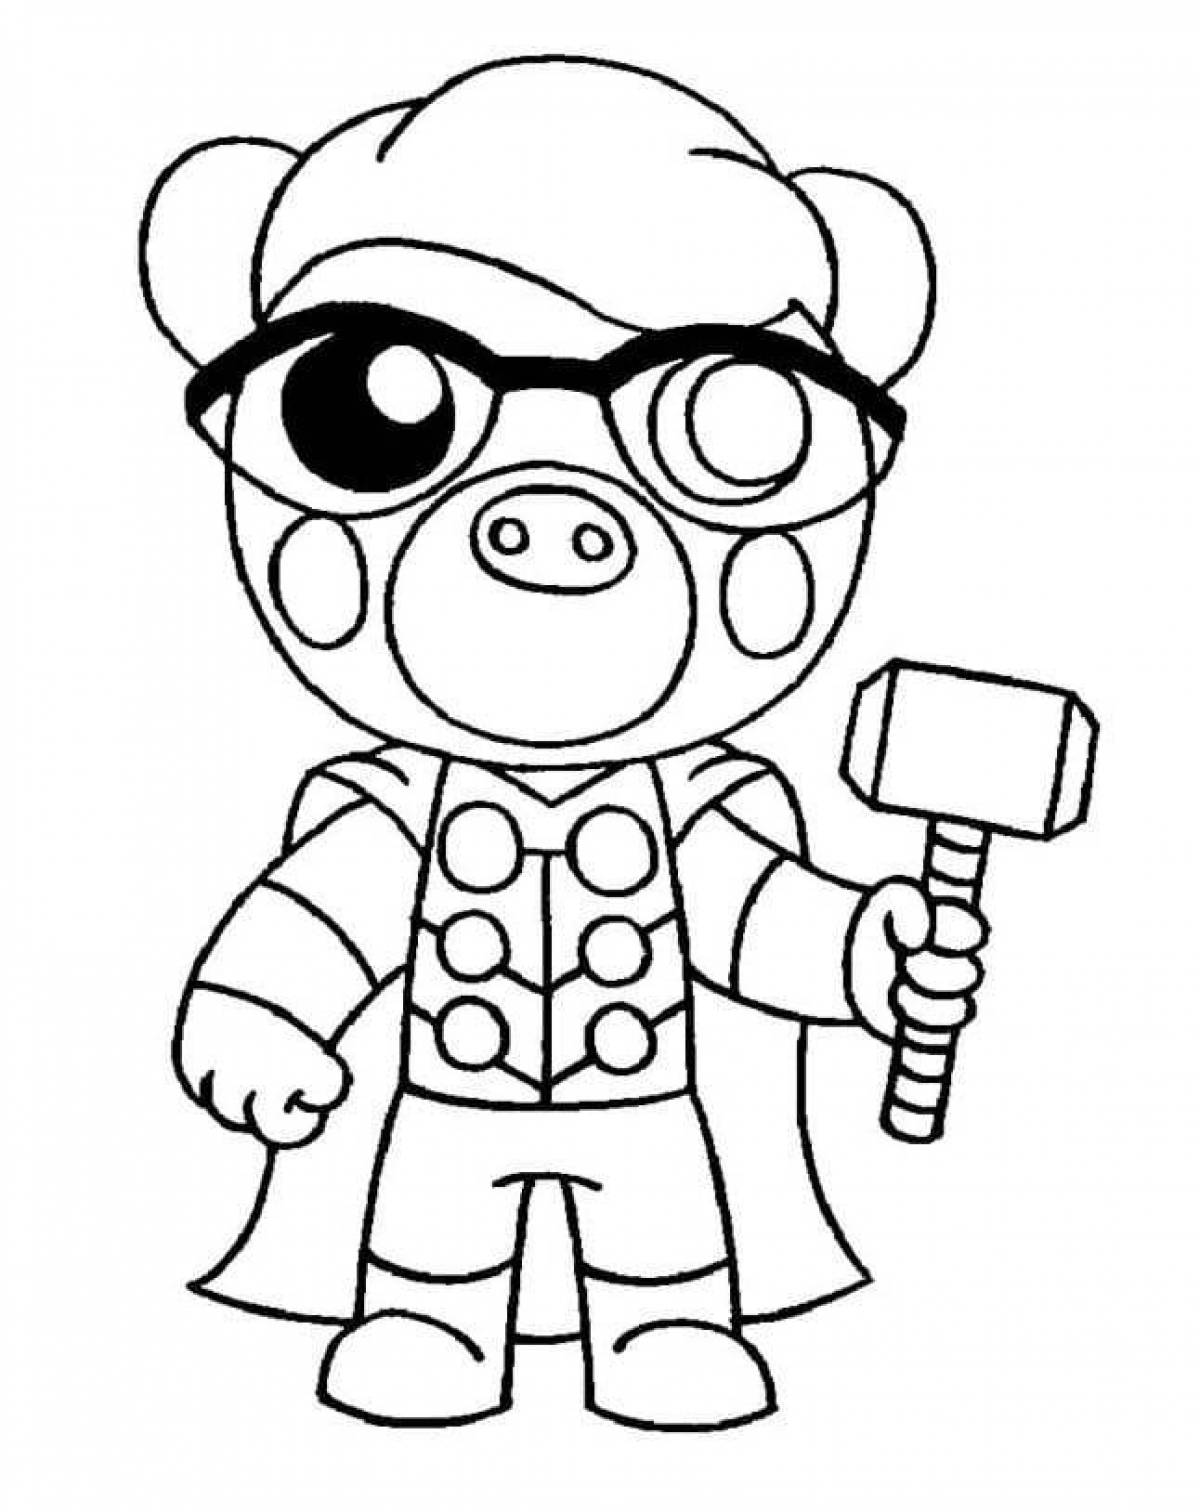 Charming roblox piggy coloring page